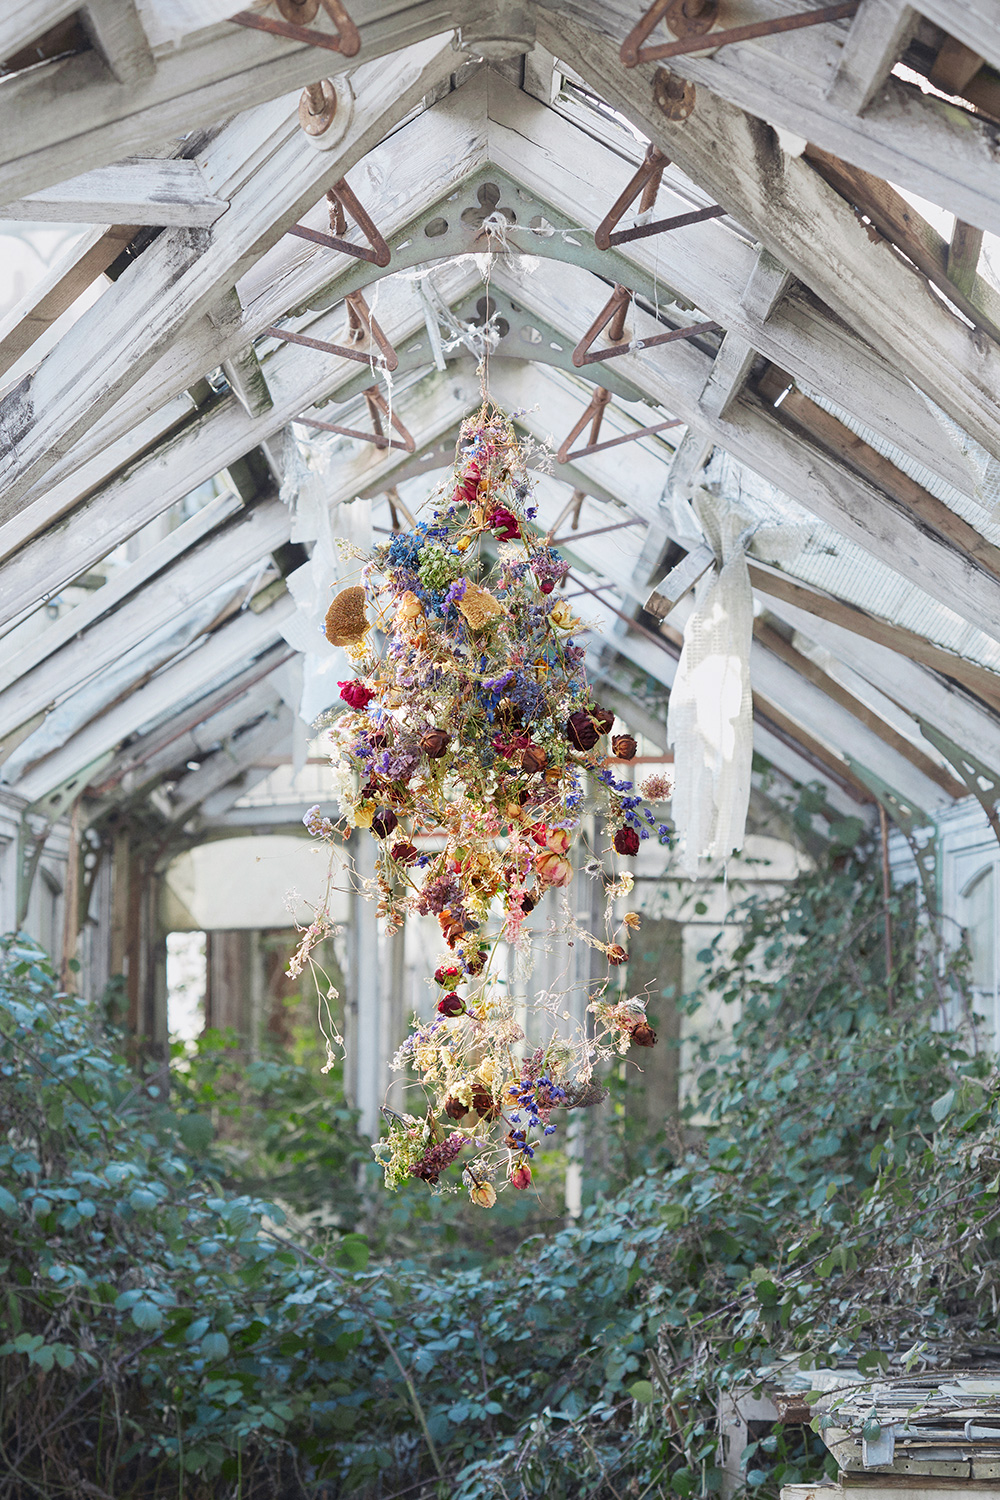 Rebecca Louise Law: Painting on Air